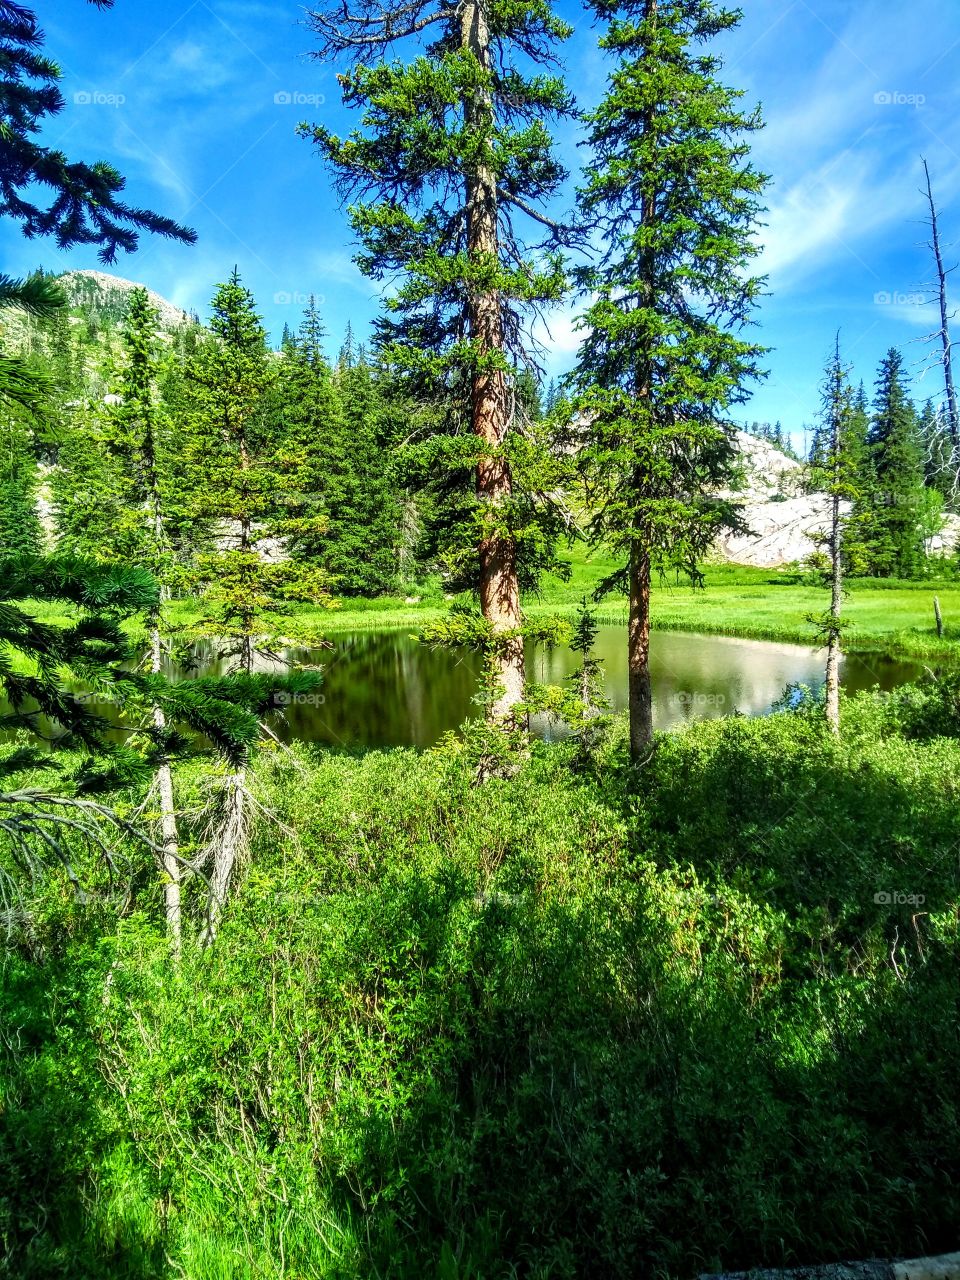 Small lake hidden in the trees in Big Cottonwood Canyon, Utah